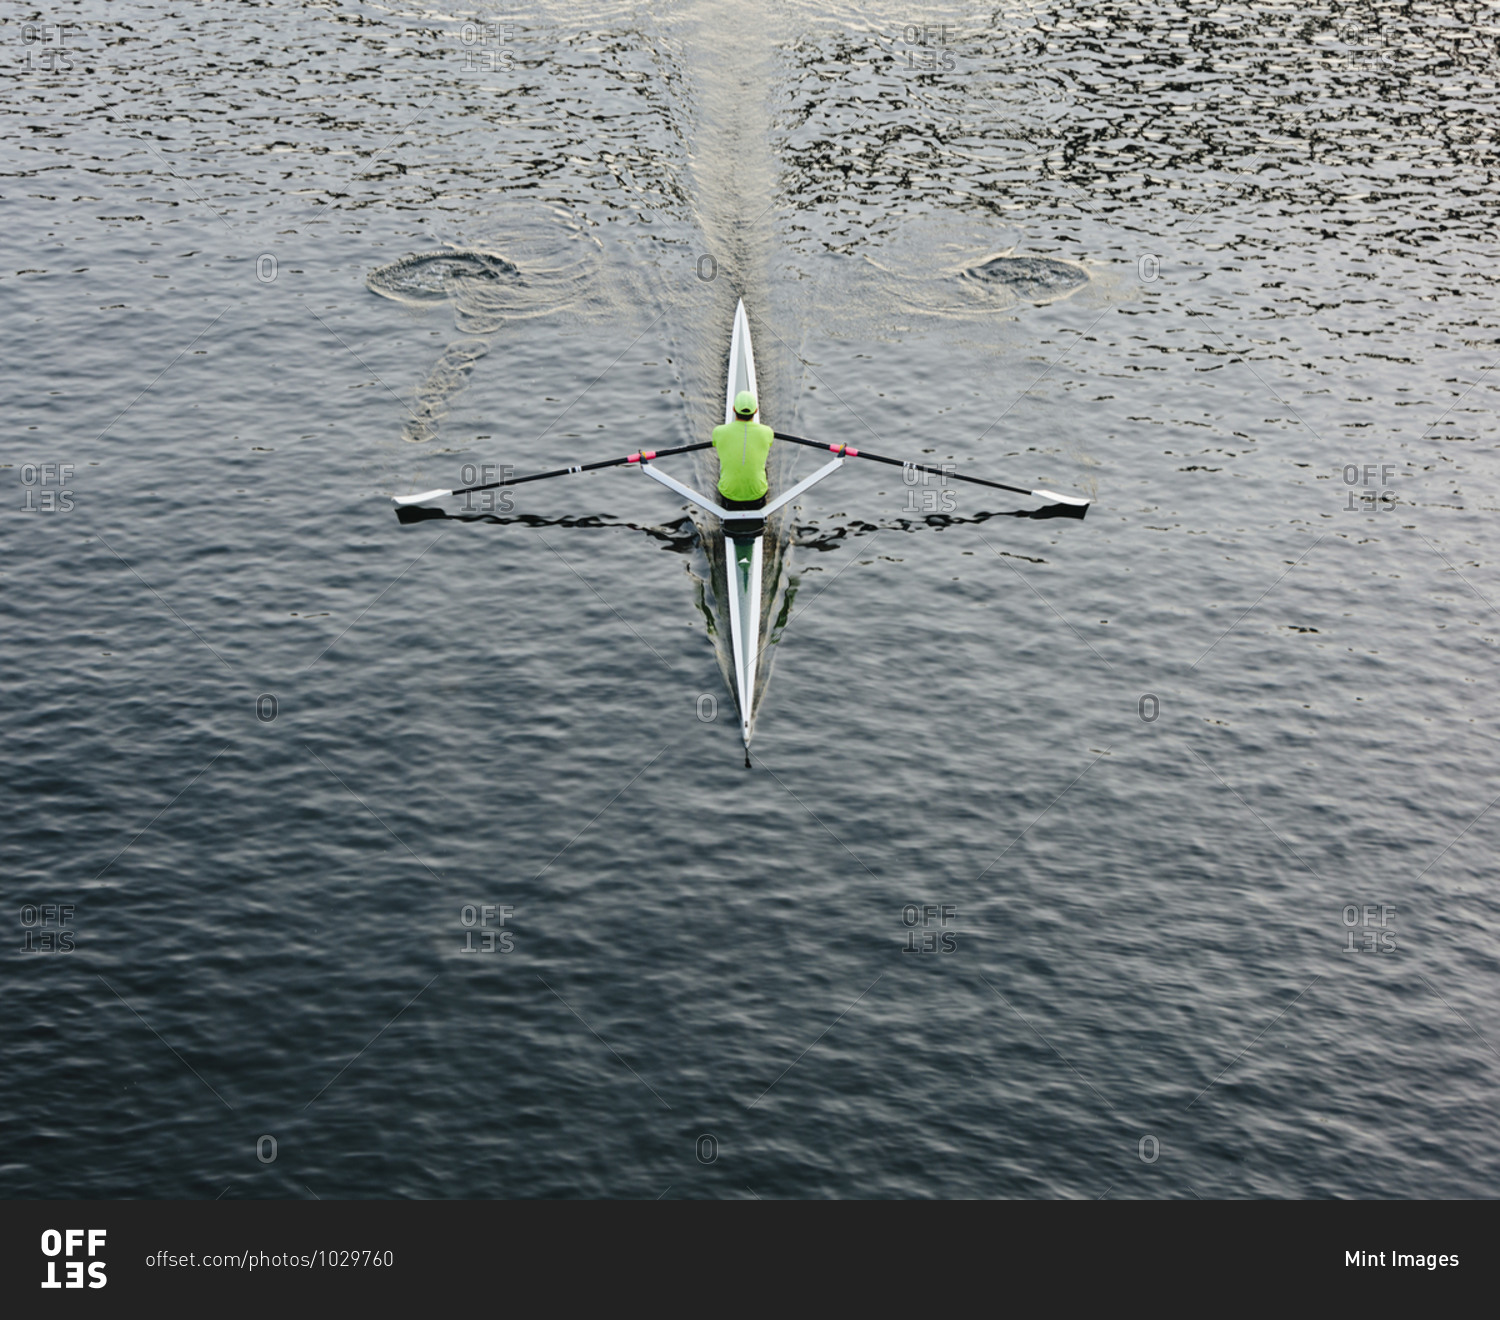 A single scull boat and rower on the water, view from above.